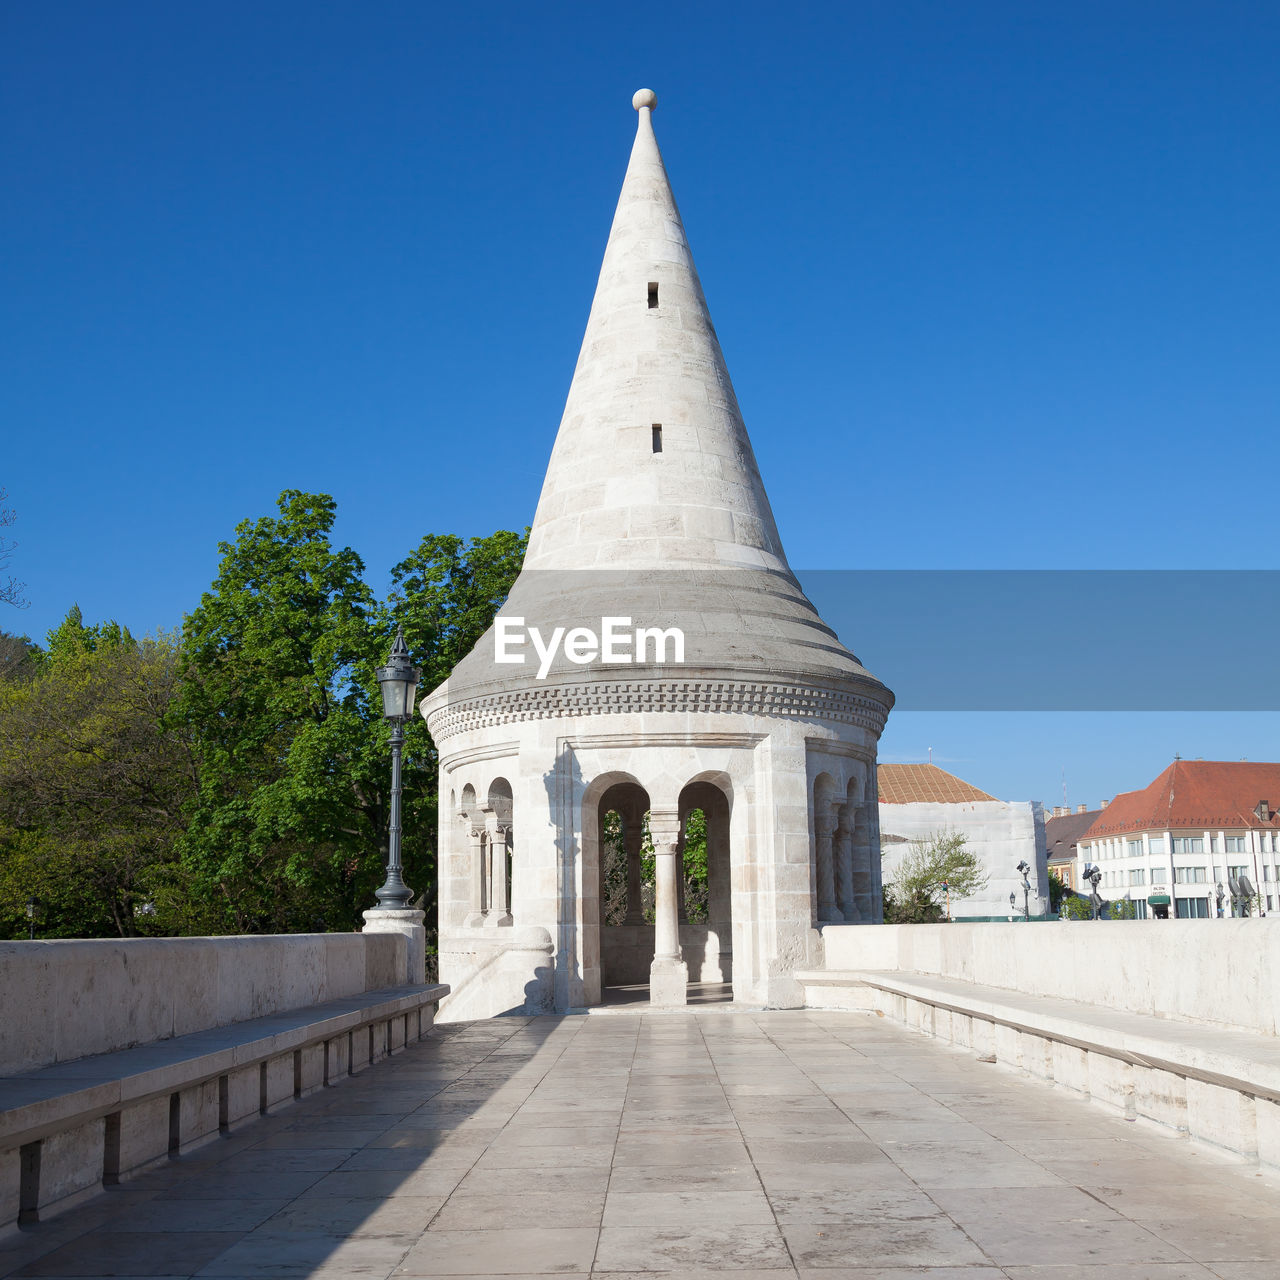 Conical turret in fishermen's bastion